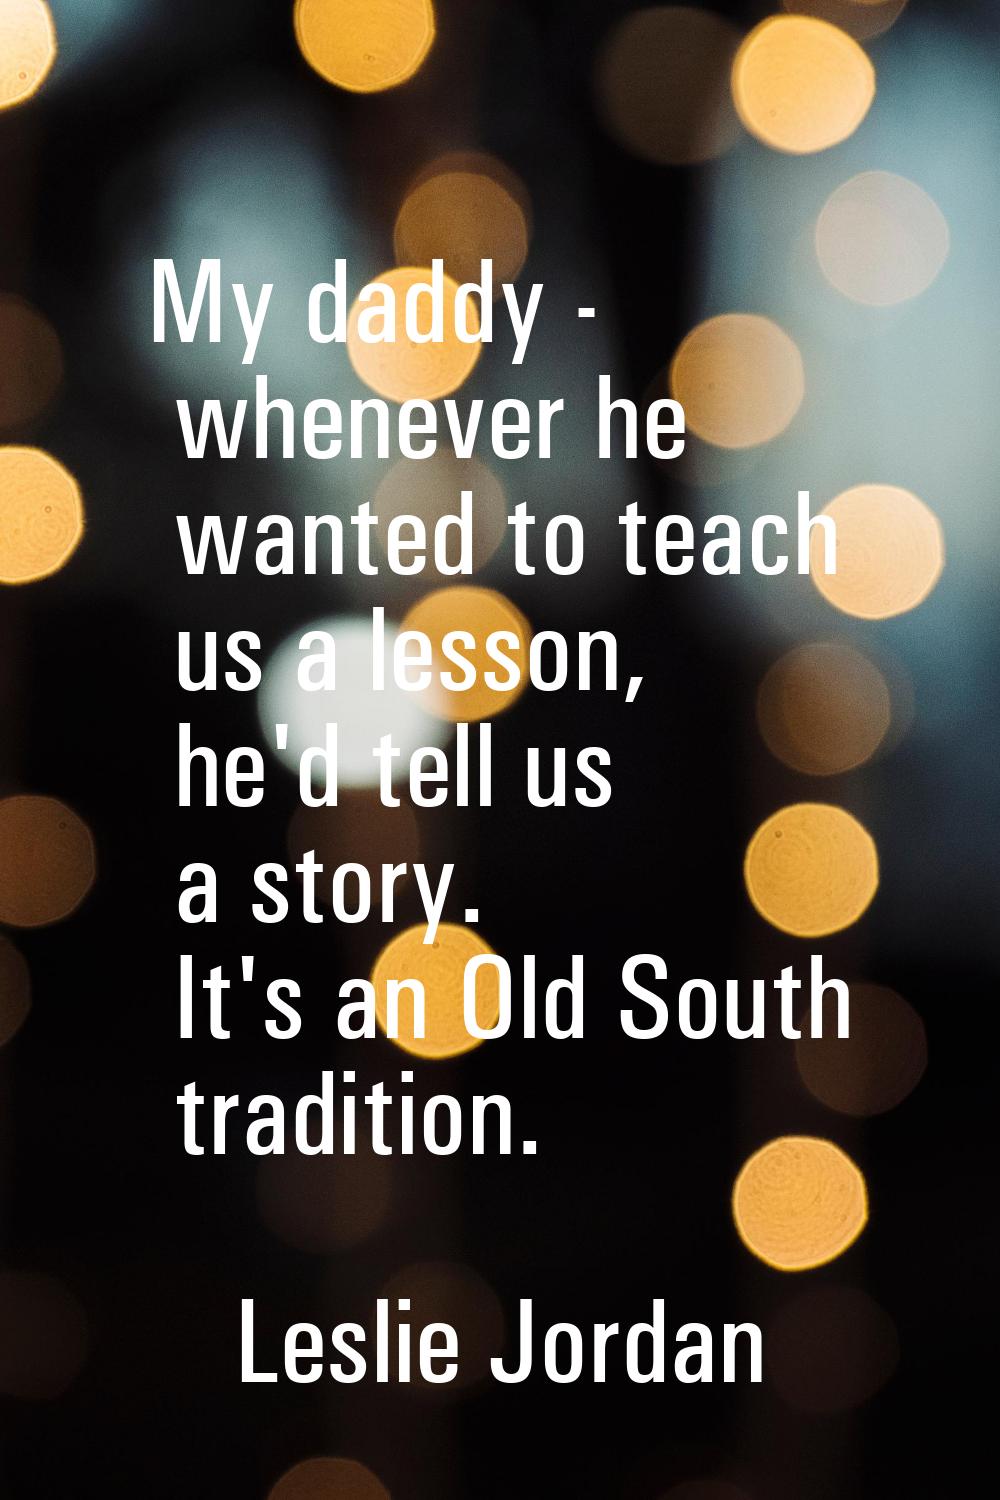 My daddy - whenever he wanted to teach us a lesson, he'd tell us a story. It's an Old South traditi